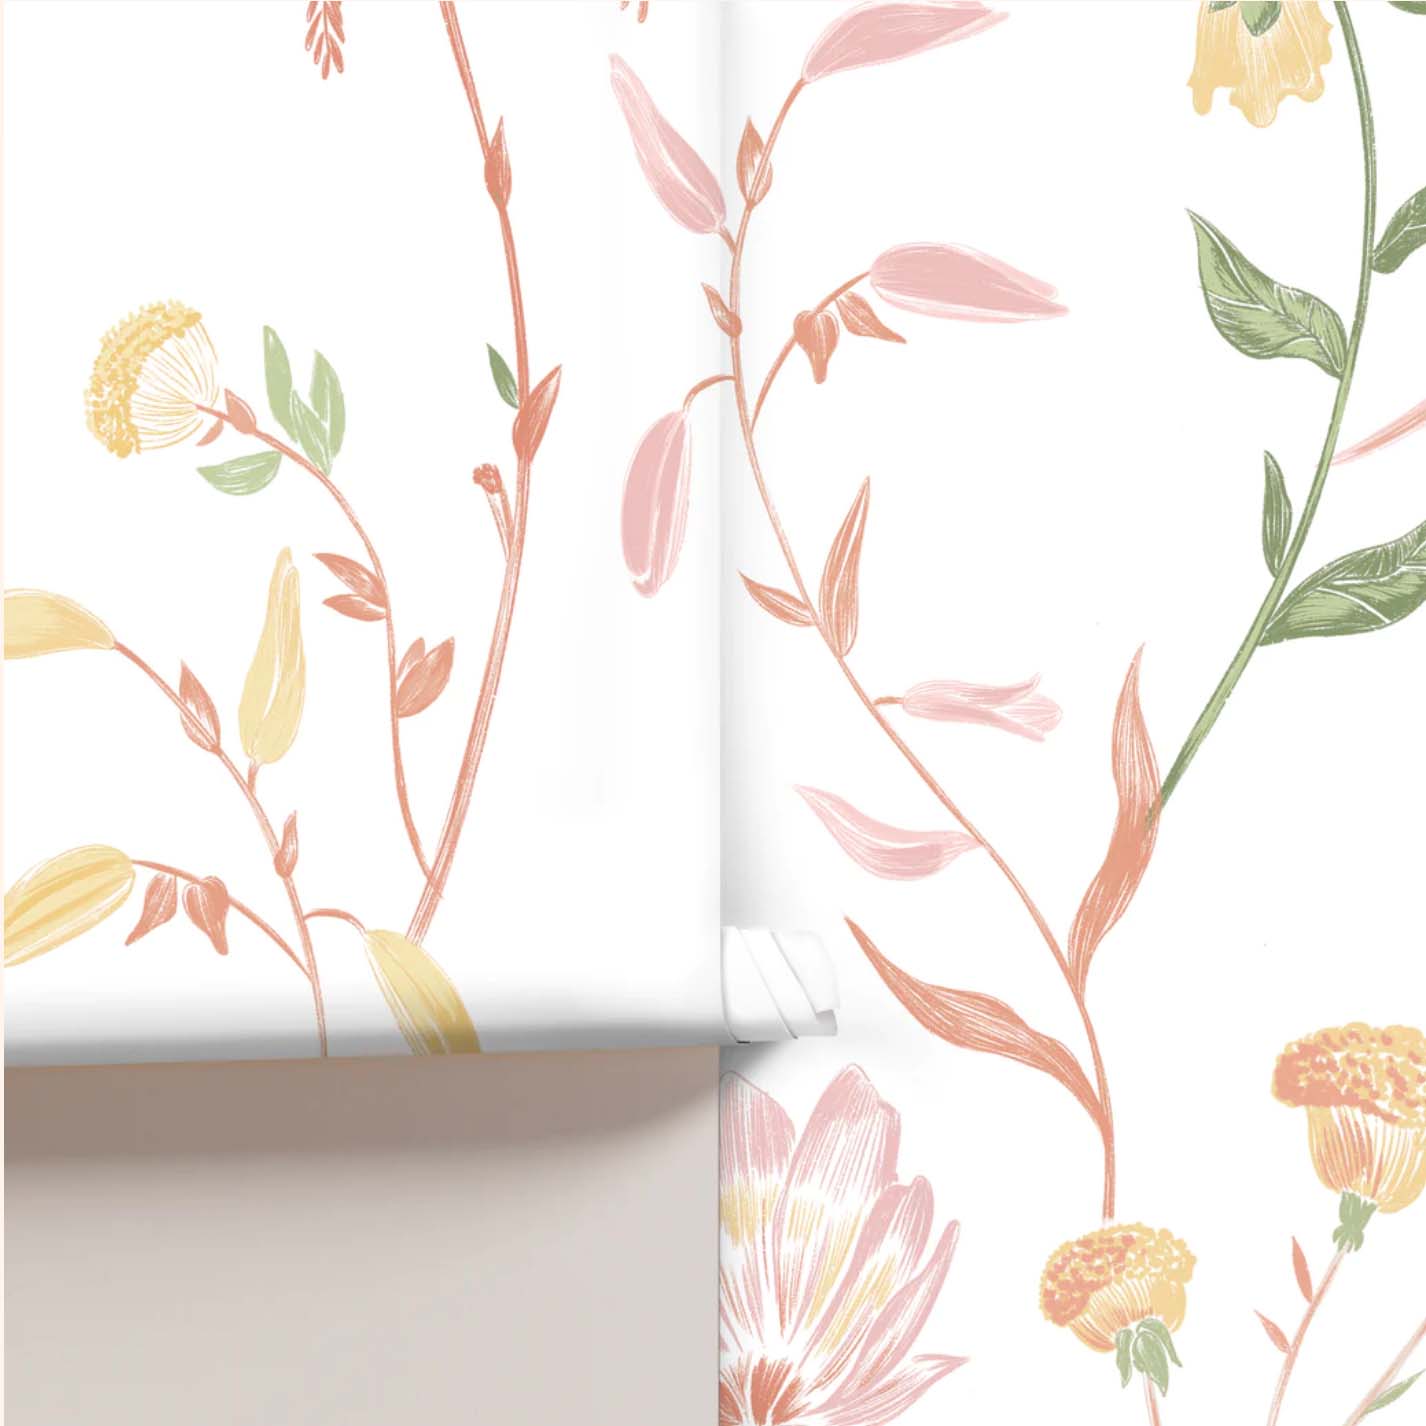 Flora wallpaper in pink and green